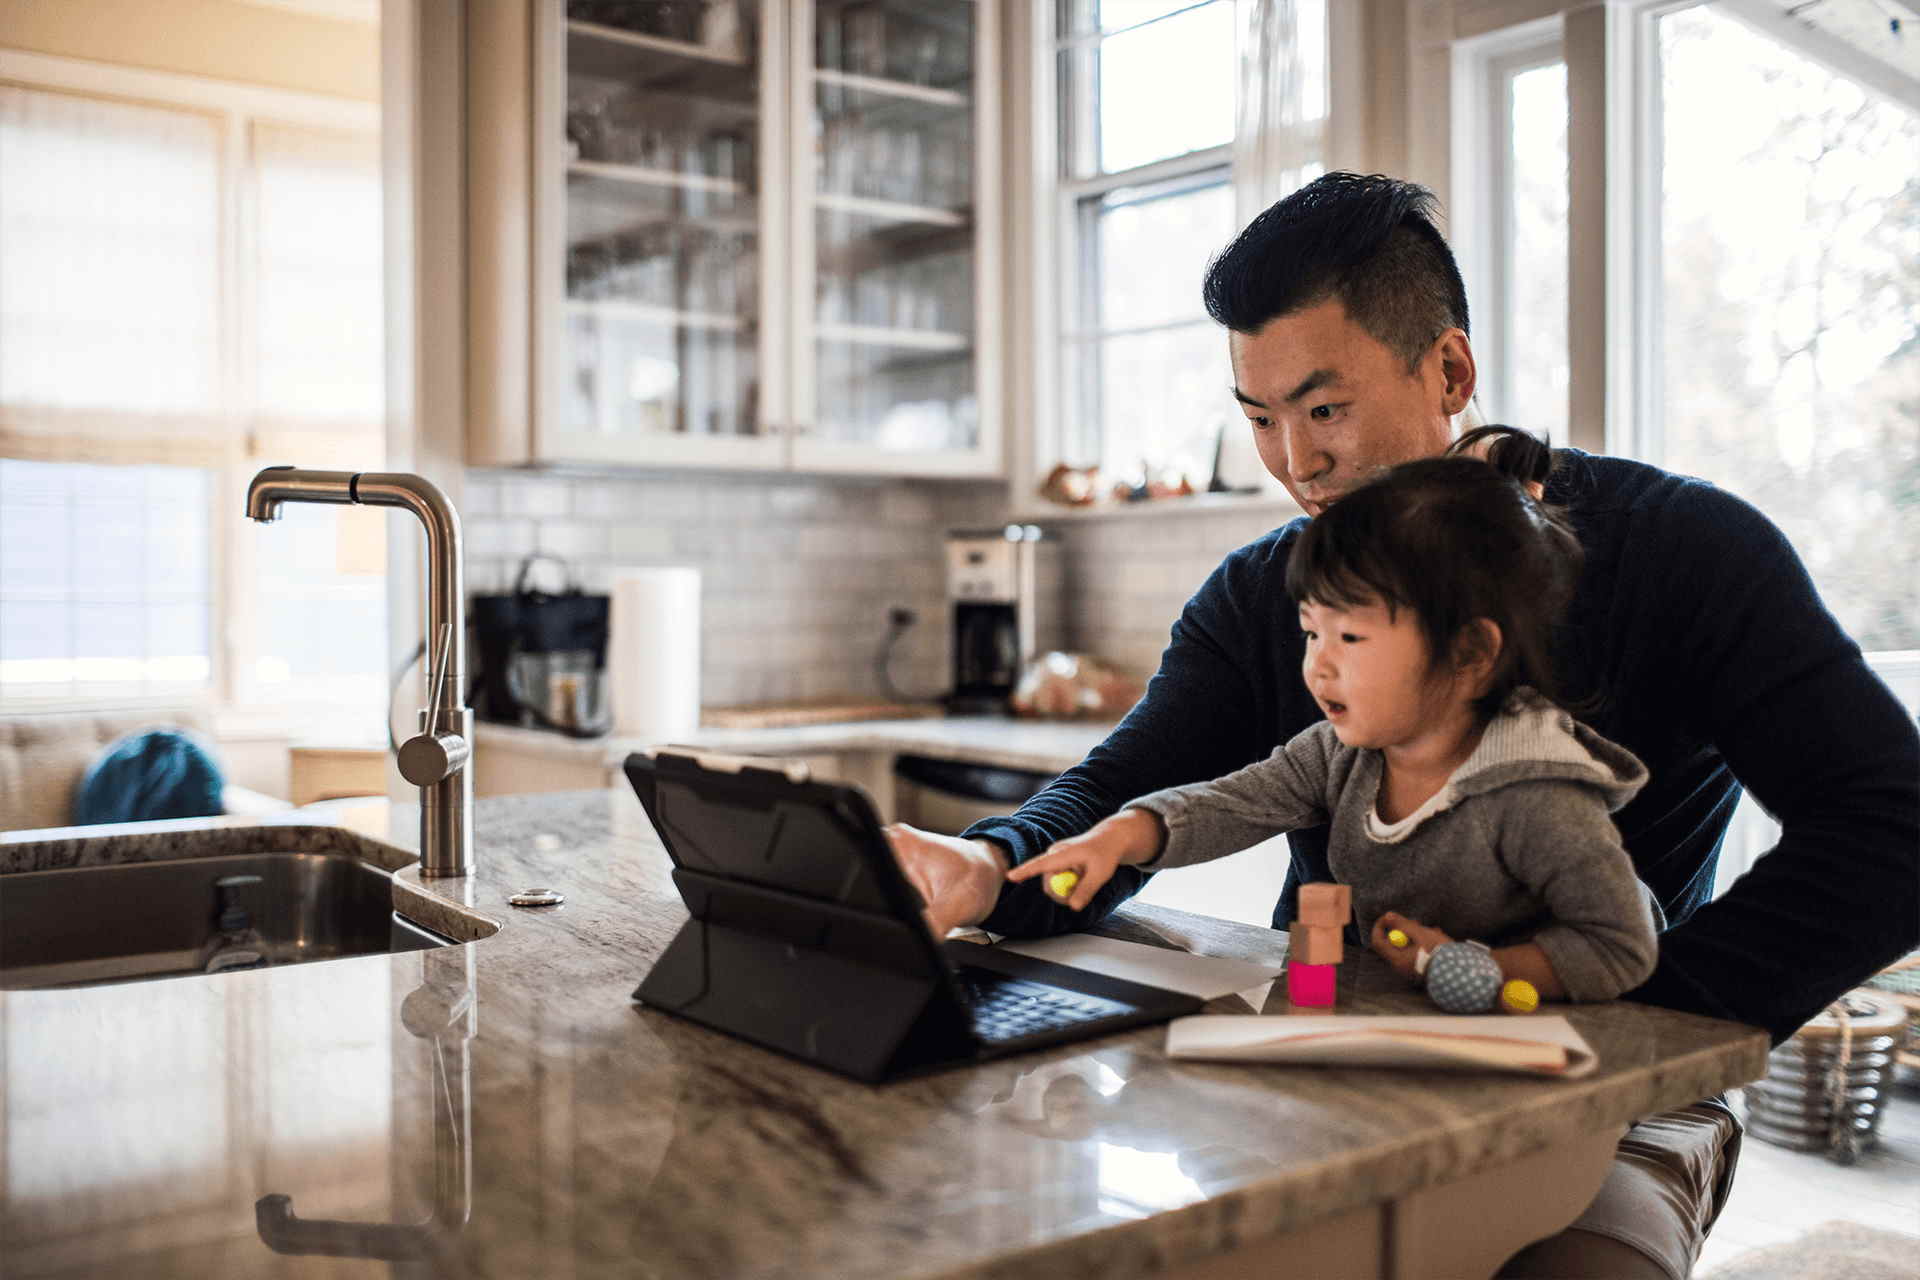 dad-and-daughter-on-tablet-at-kitchen-counter